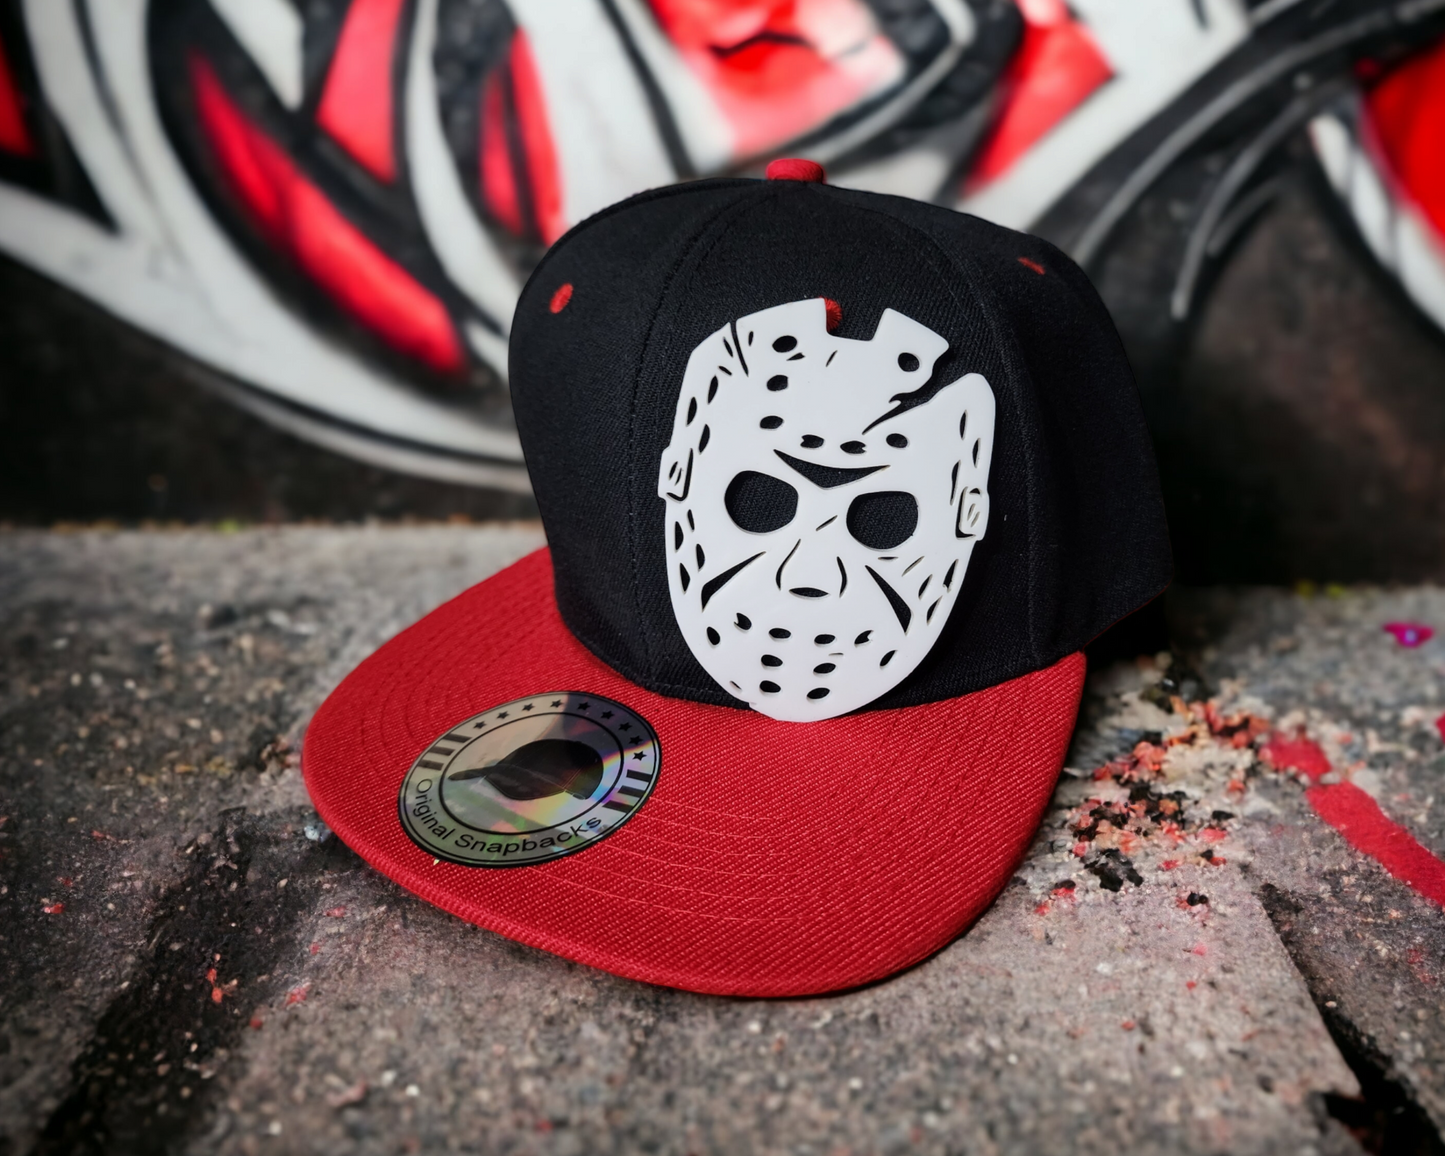 Jason Voorhees Friday the 13th acrylic hat, snapback